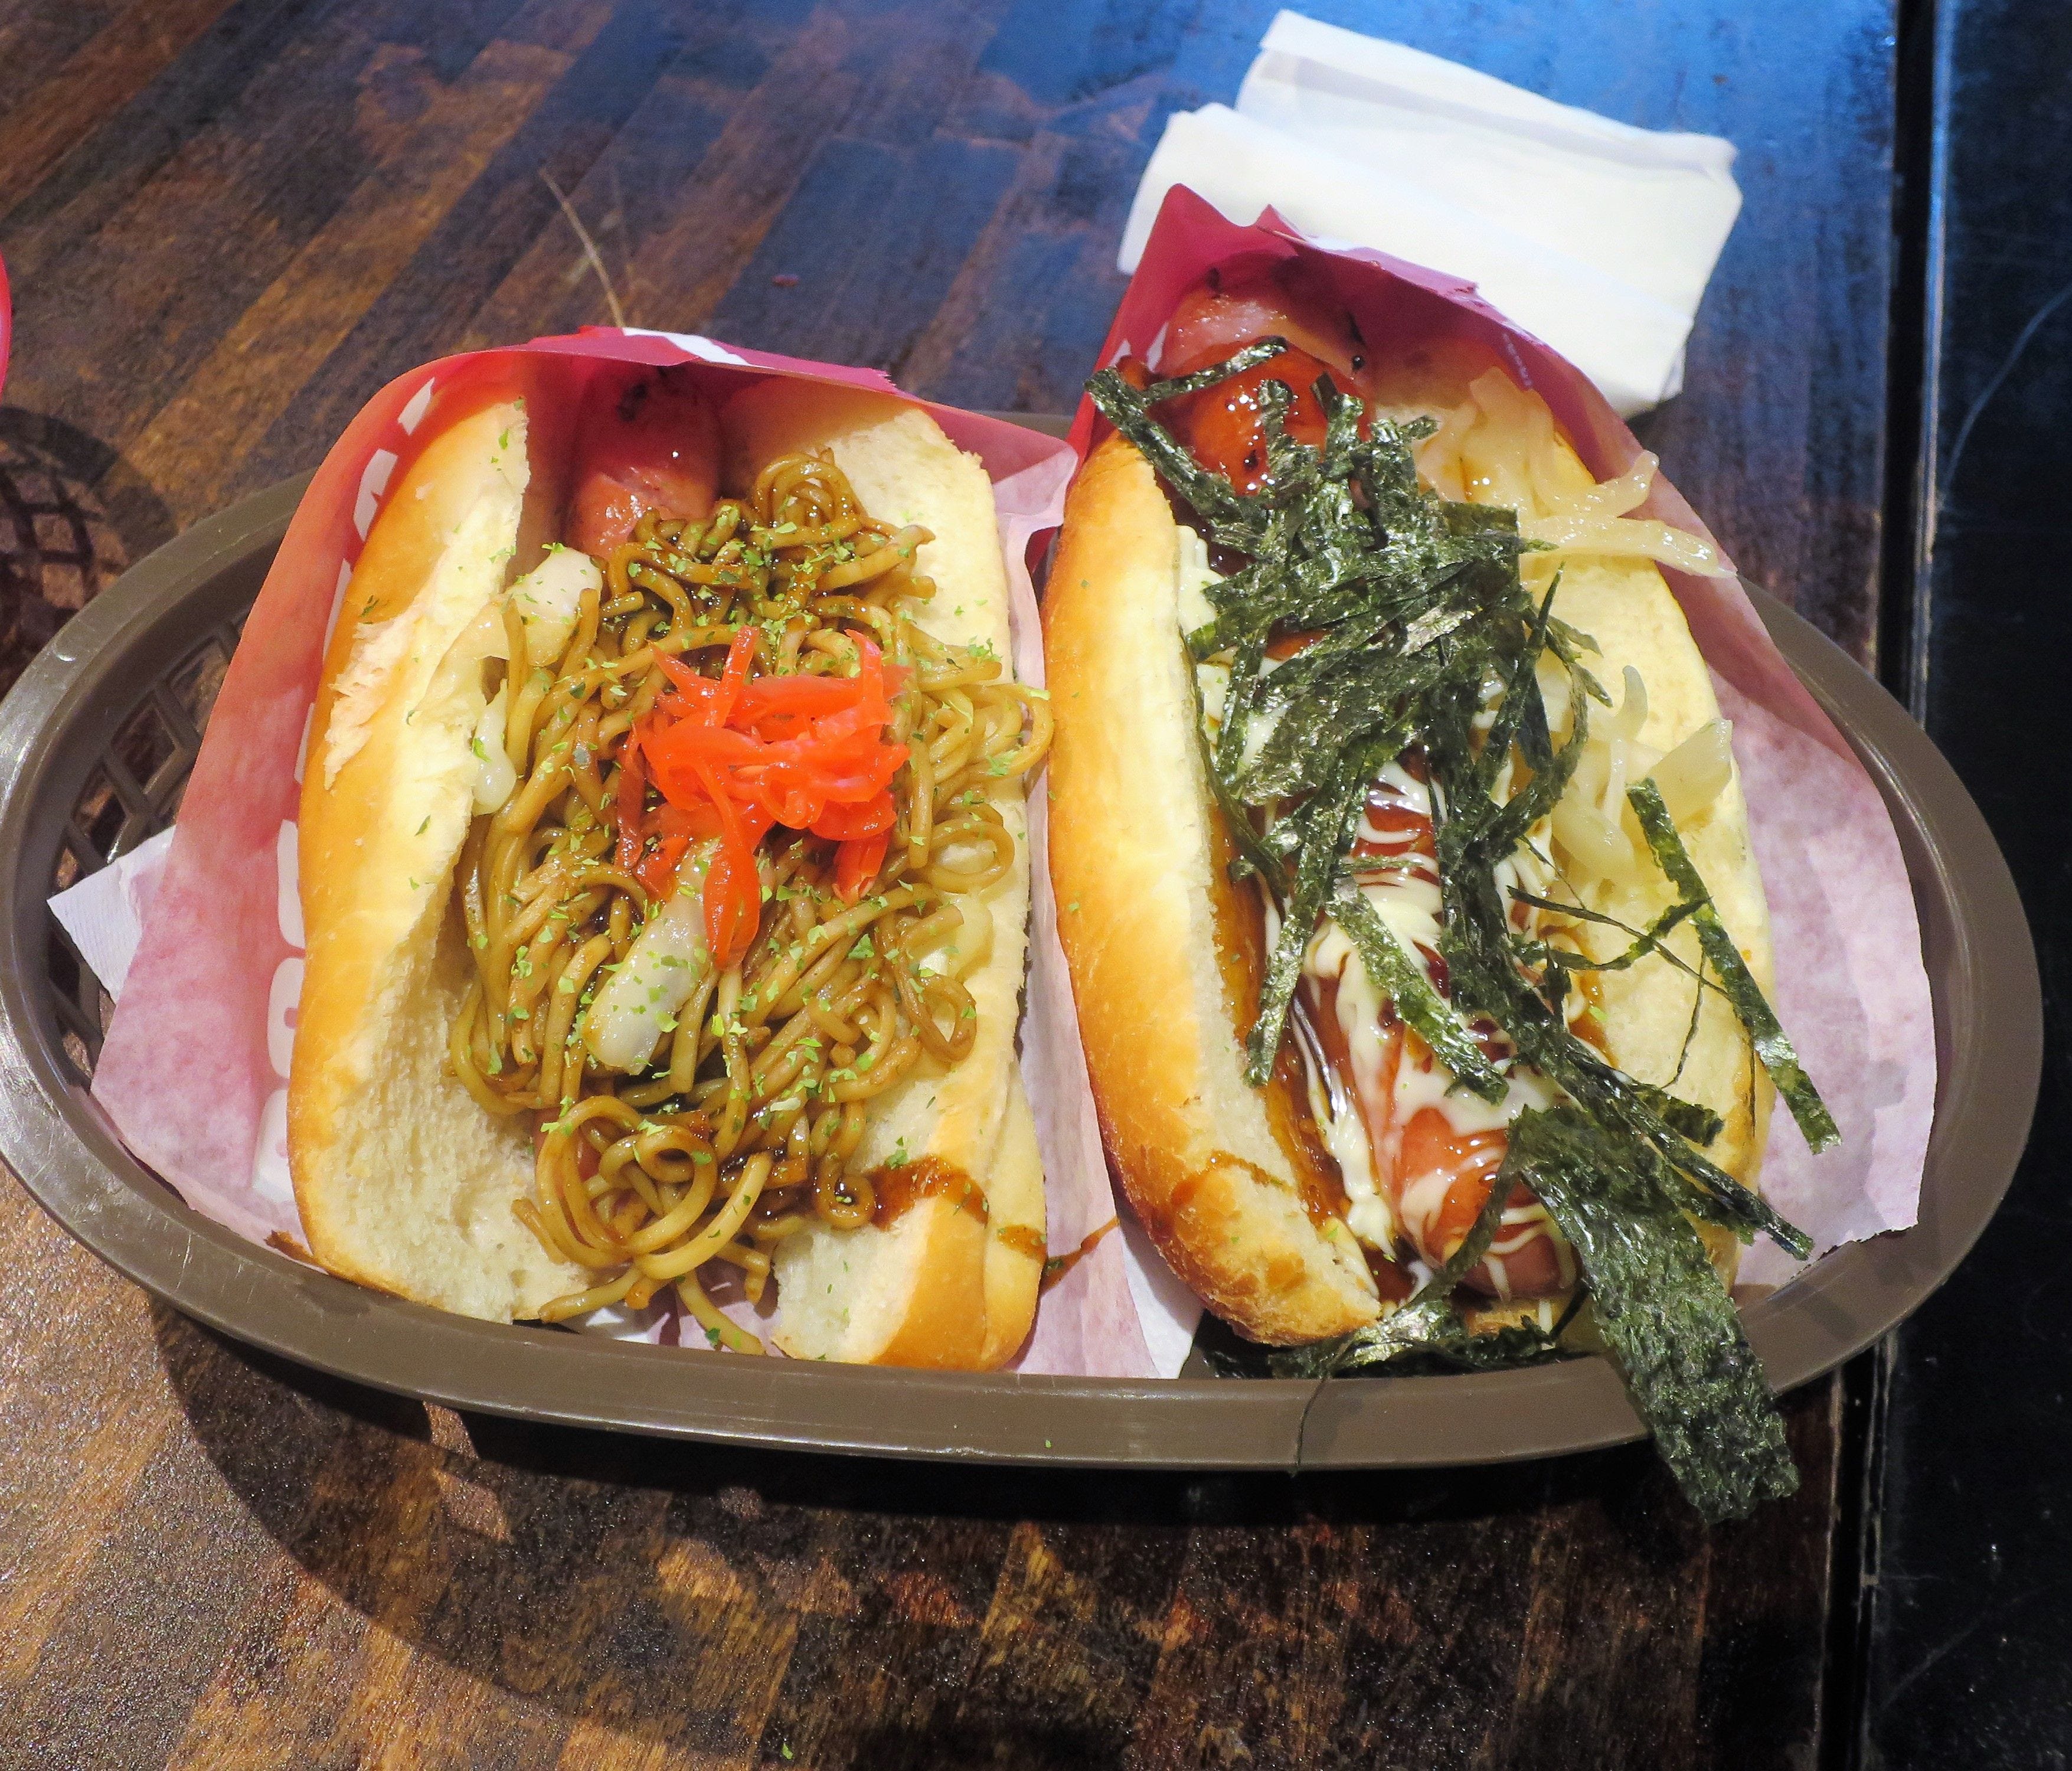 The Arabiki pork hot dog topped with yakisoba noodles (left) and the bestseller, the Kurobuta Terimayo (right), are two popular Japadog specialties.